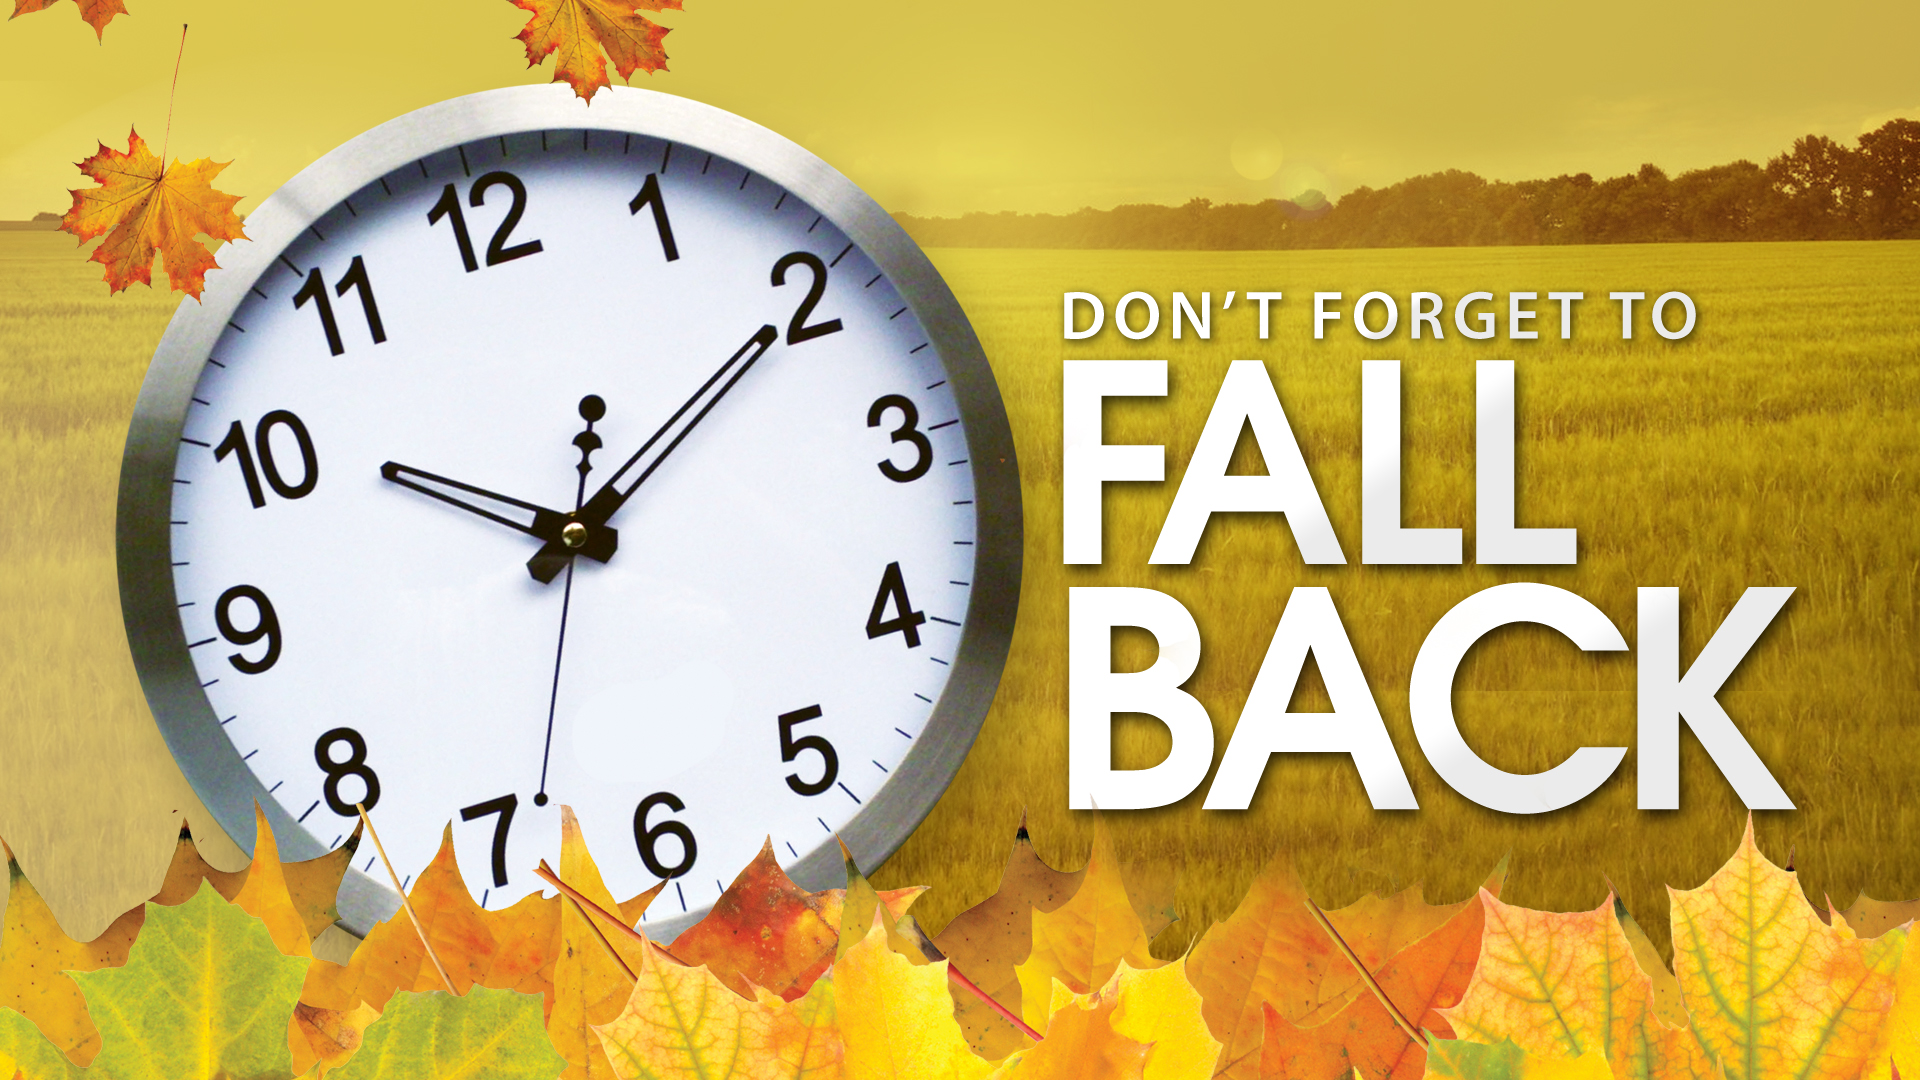 Dont Forget to Fall Back!: Daylight Savings Time Ends Sunday, Nov. 2